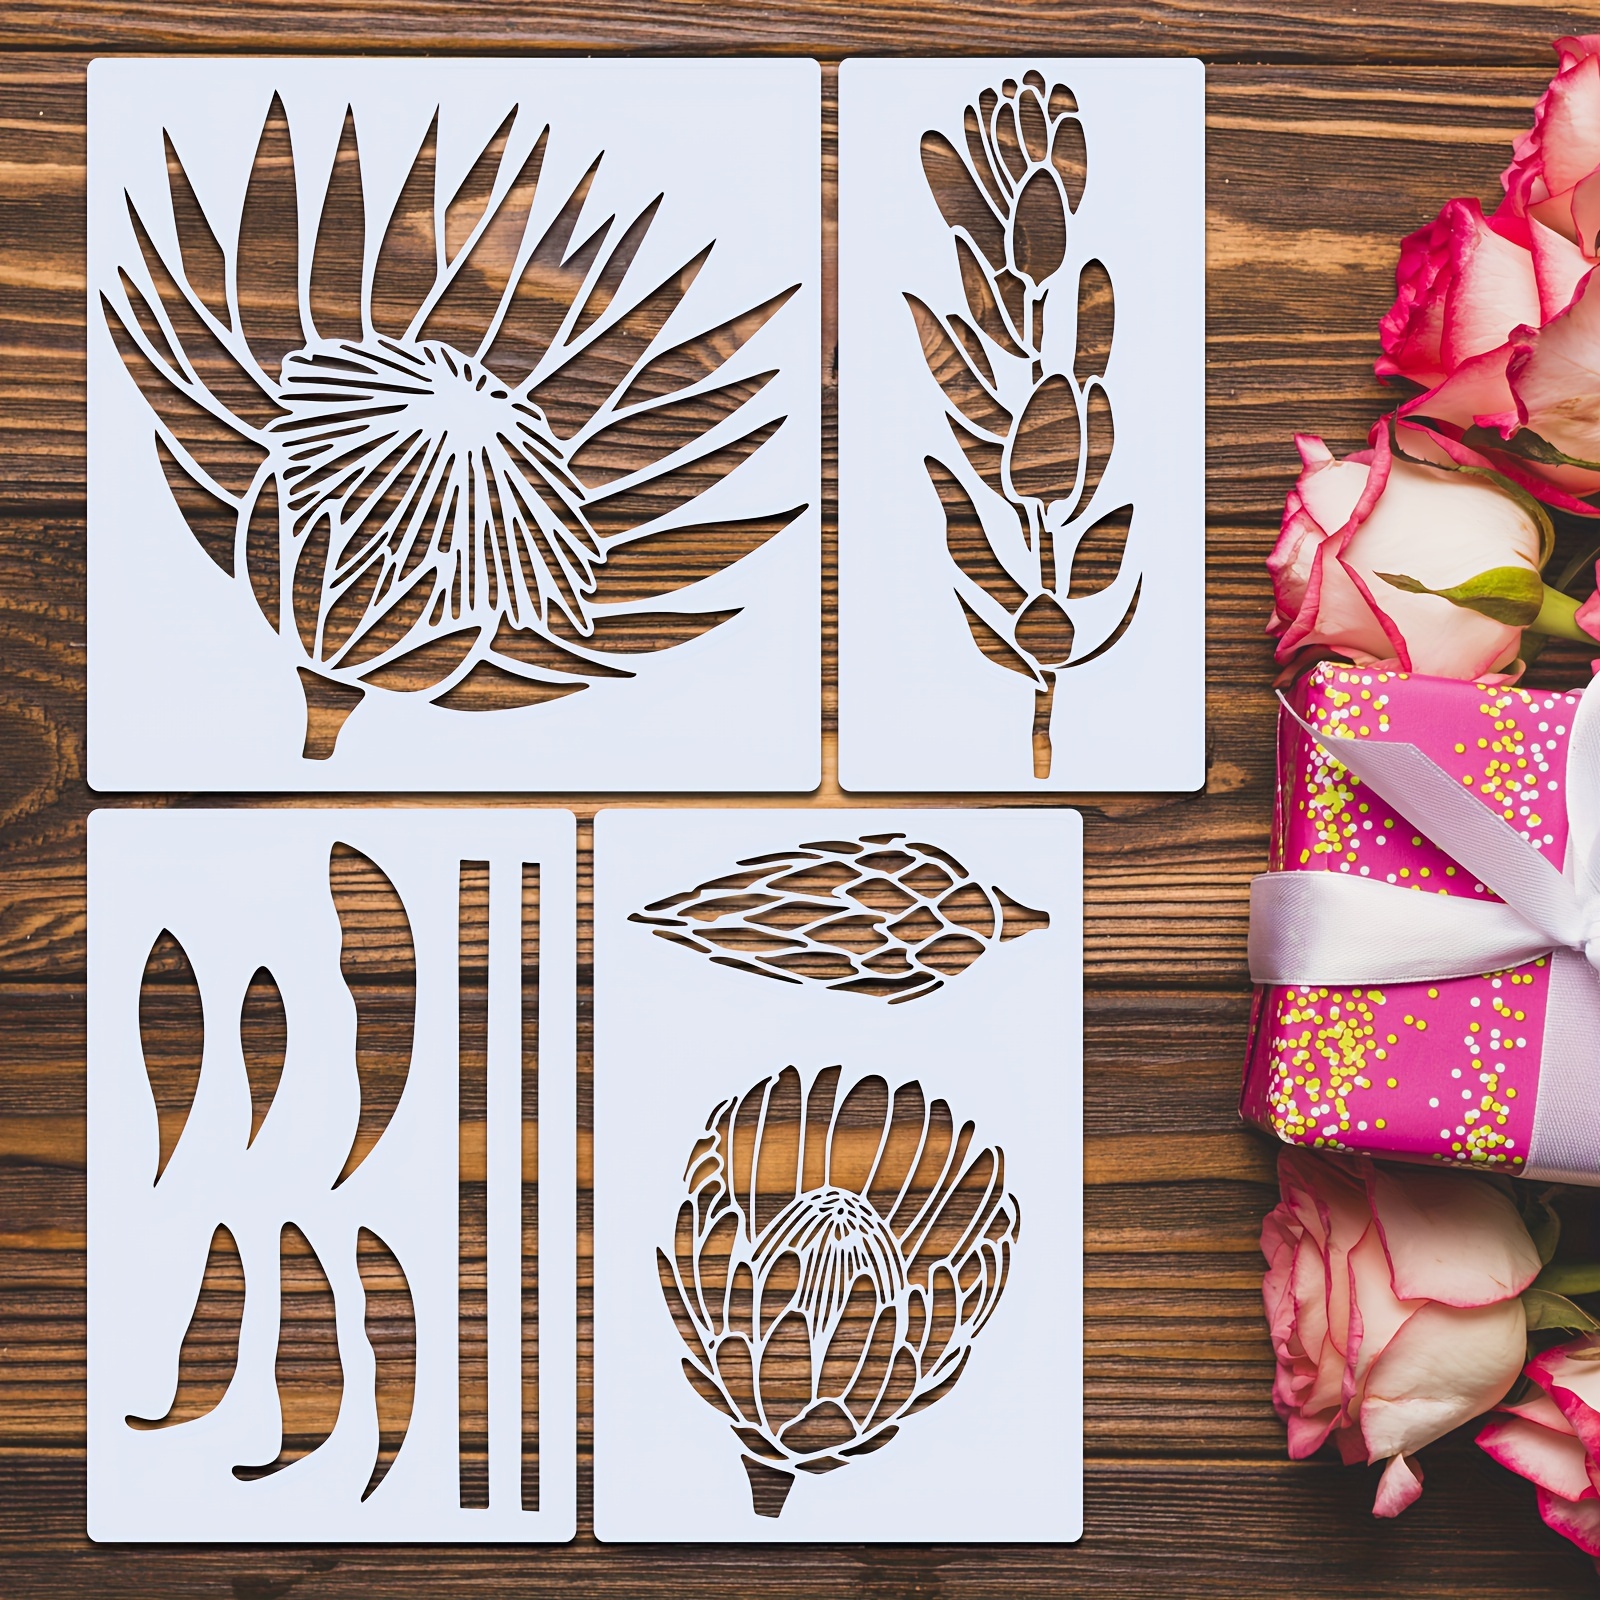 

Large Flower Stencils Set - 4 Reusable Protea Flower And Leaf Painting Templates - Ideal For Garden Fence, Wall, And Furniture Decor - Creamy White Plastic Stencils & Templates